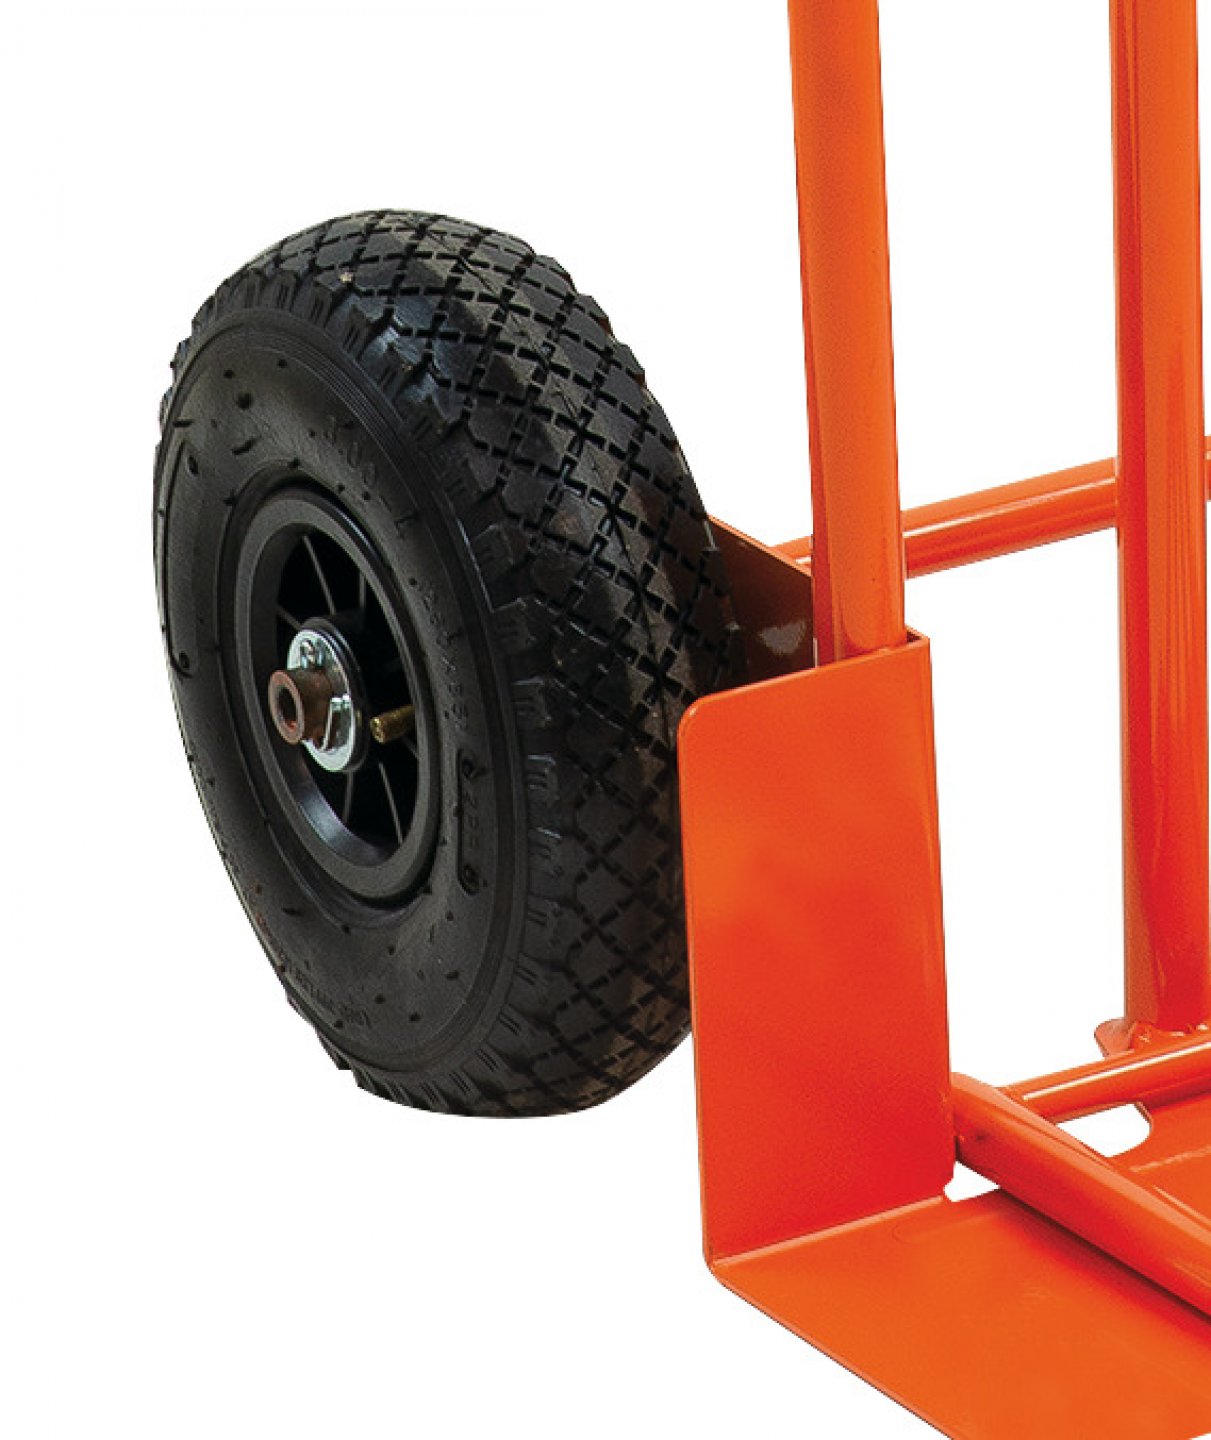 Axis hand truck - inflatable wheels 11